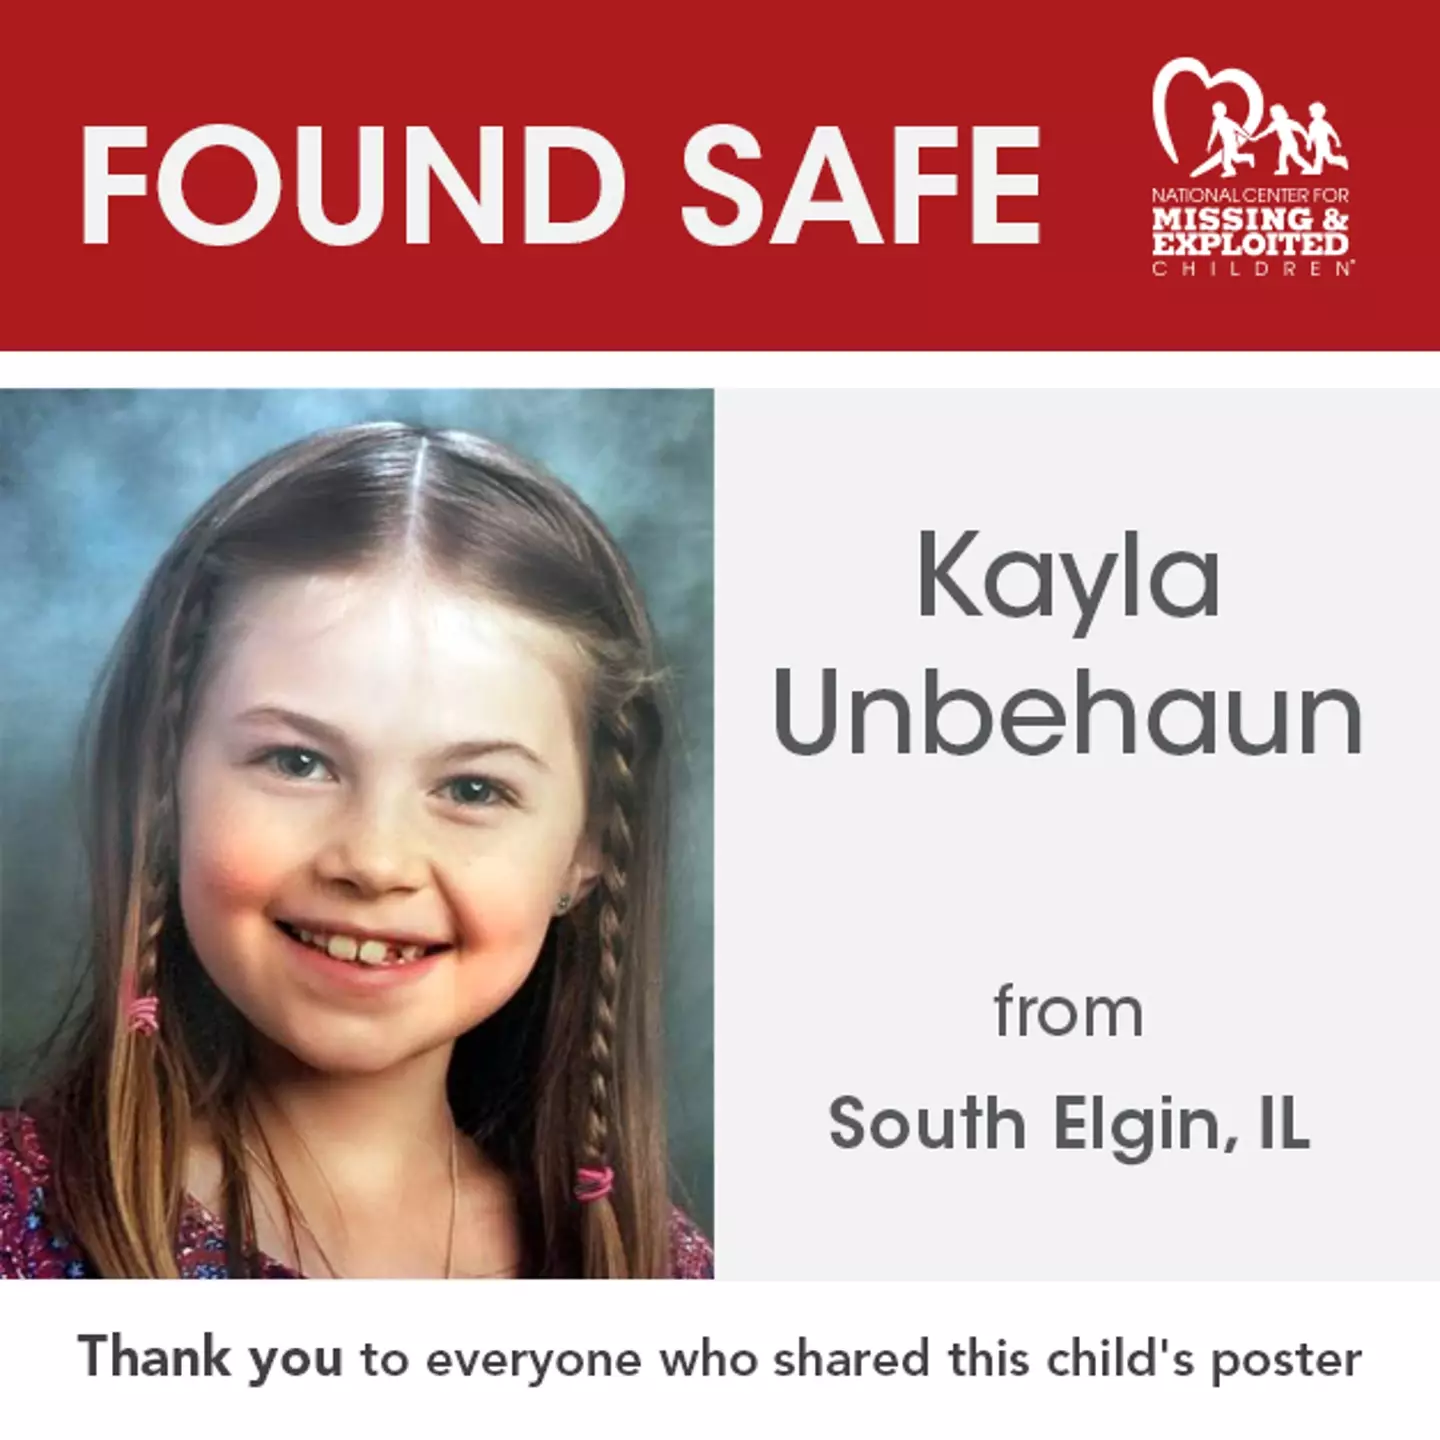 Kayla Unbehaun has finally been found after nearly six years of being missing.